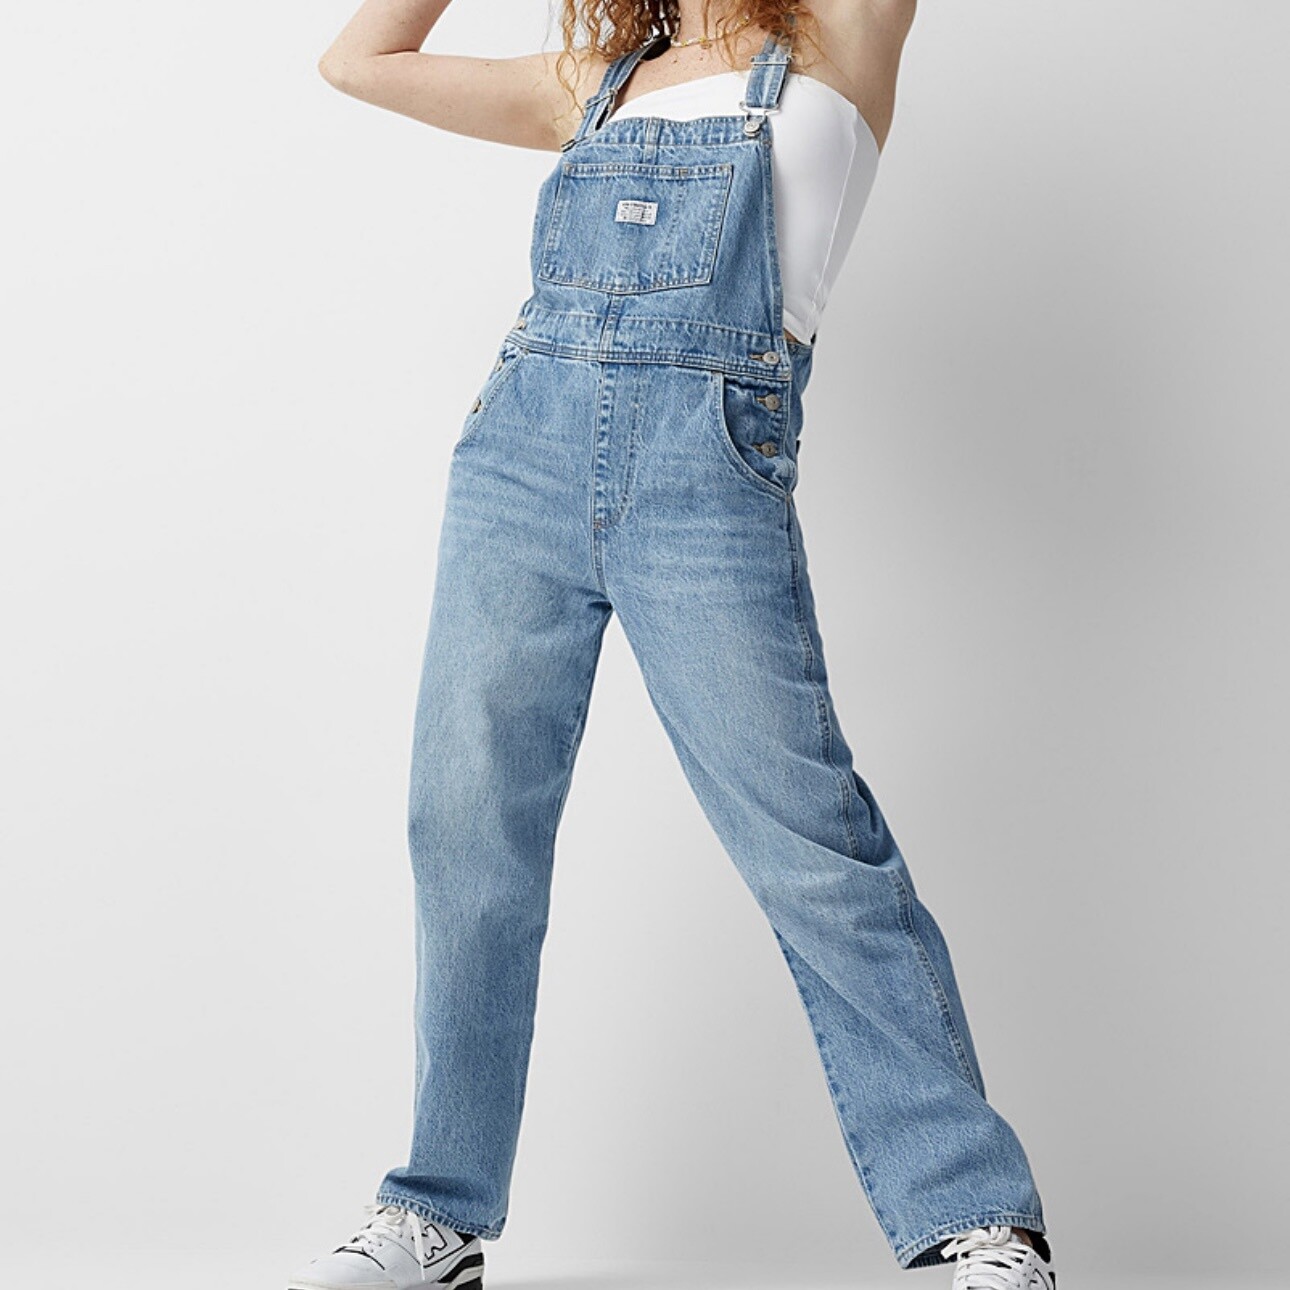 Levi's Vintage Overall What A Delight